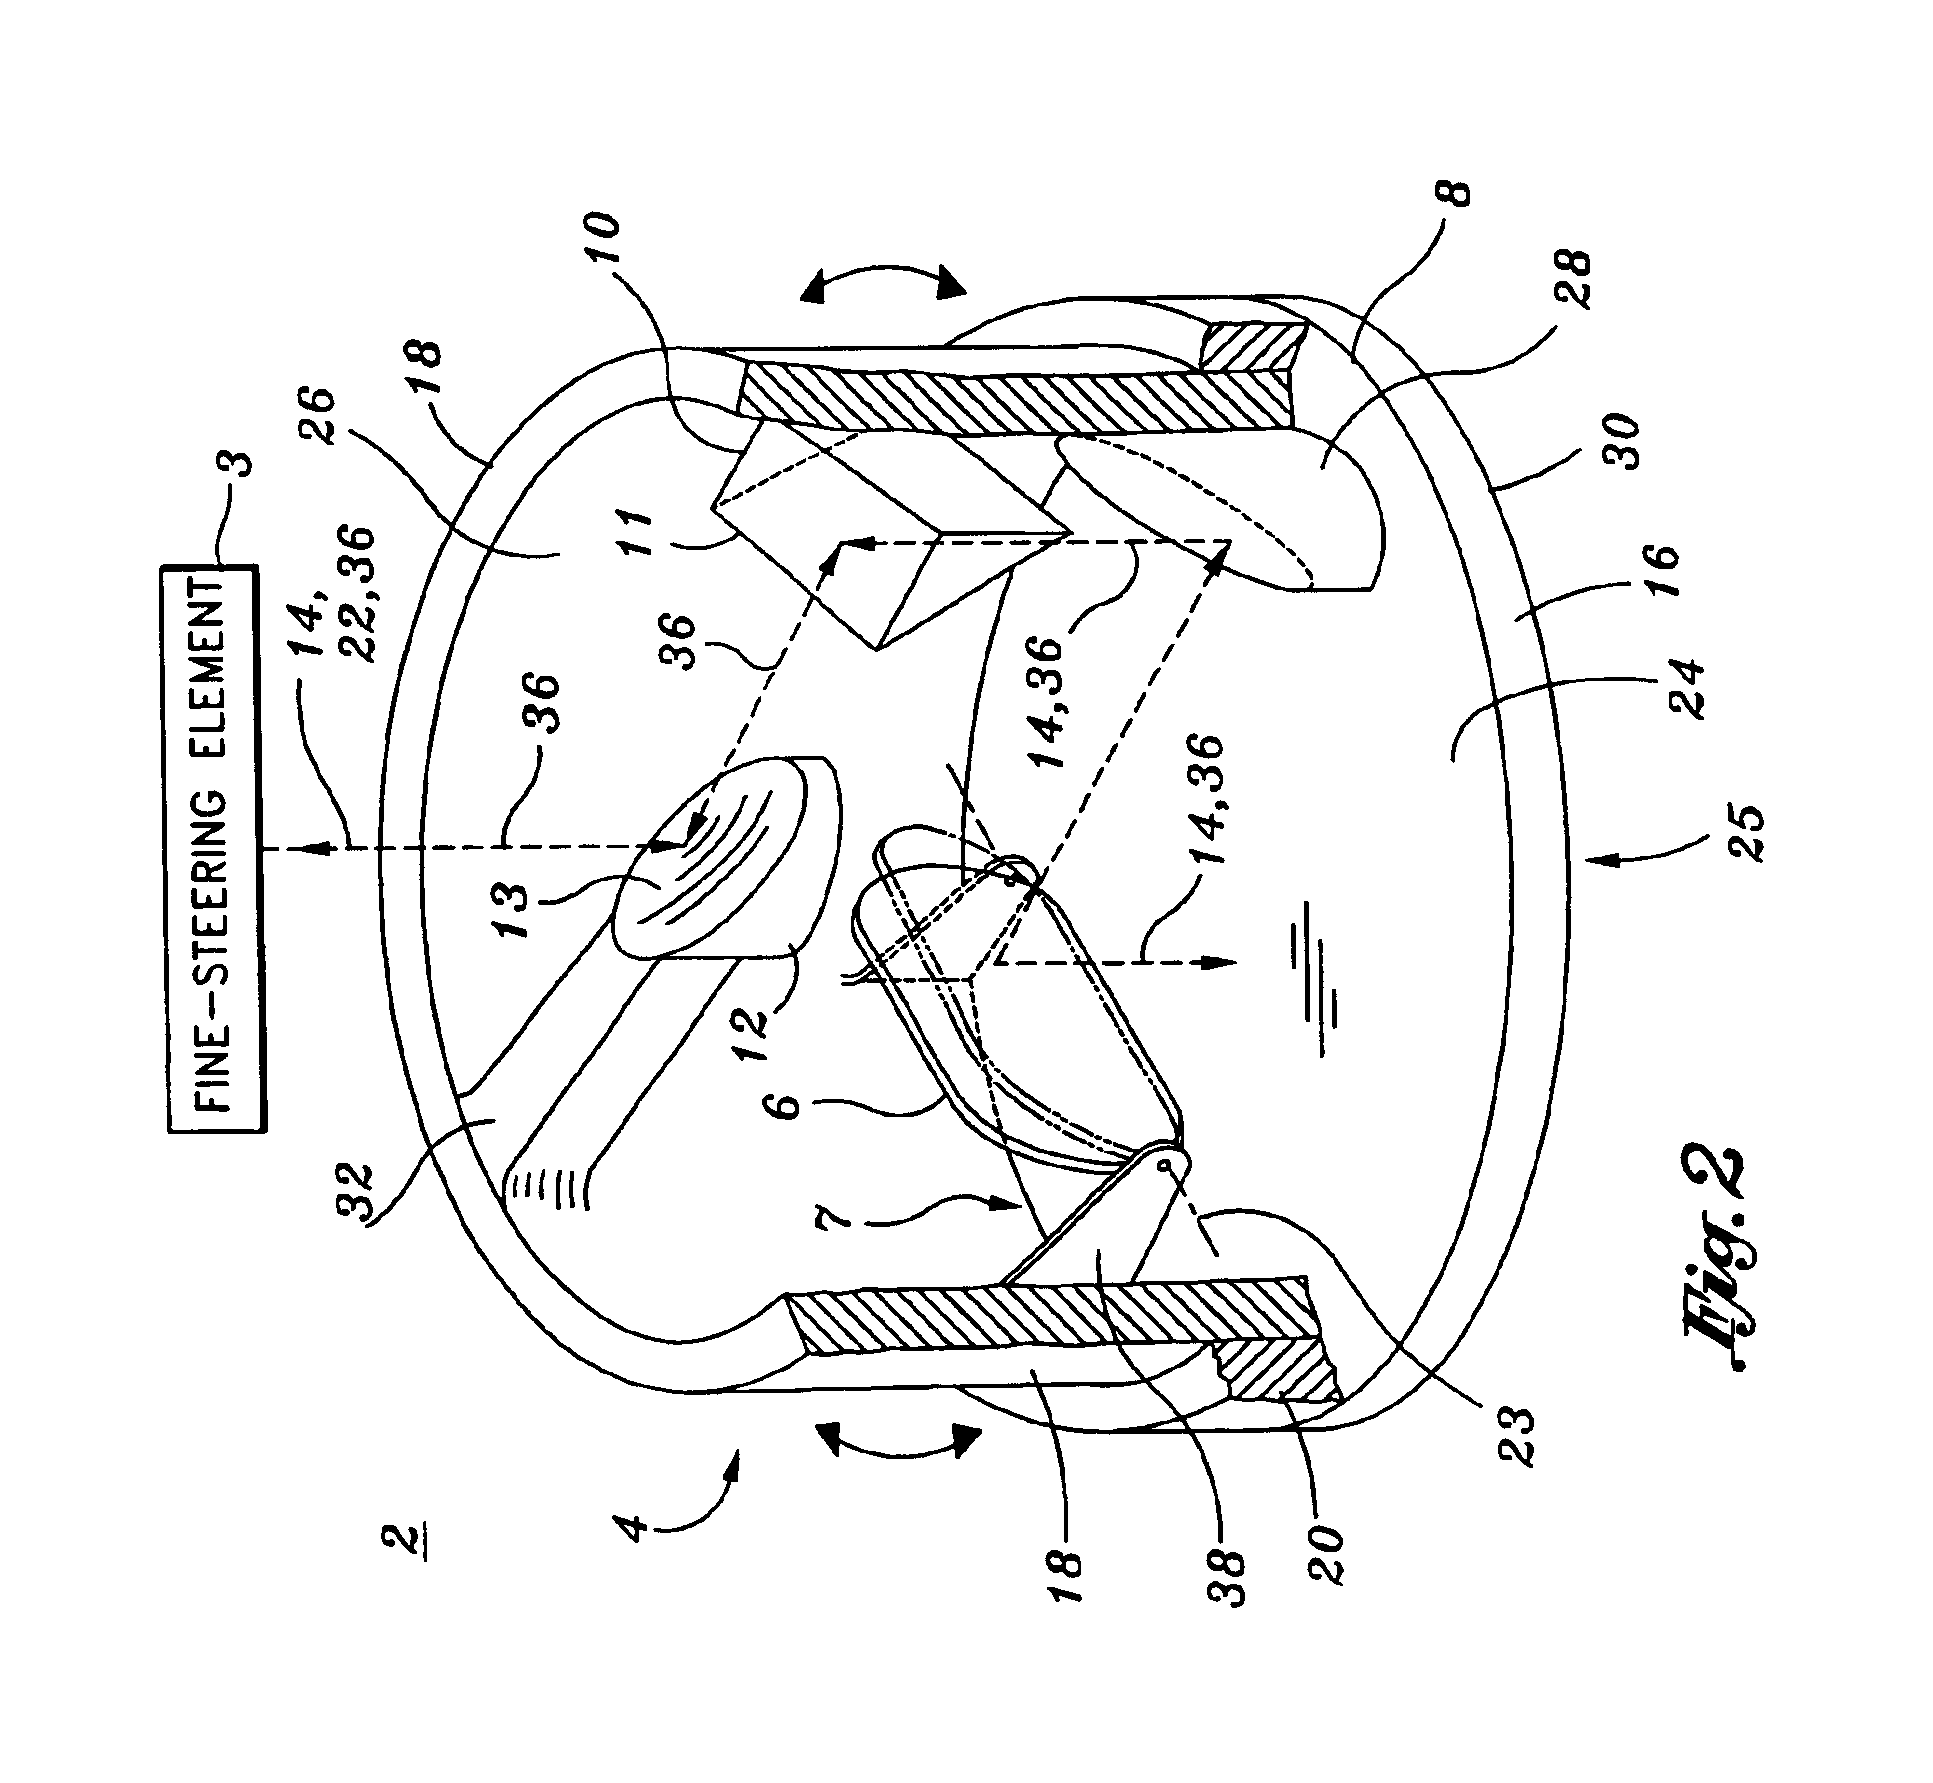 Conformal all-reflective beam-steering (CARBS) device